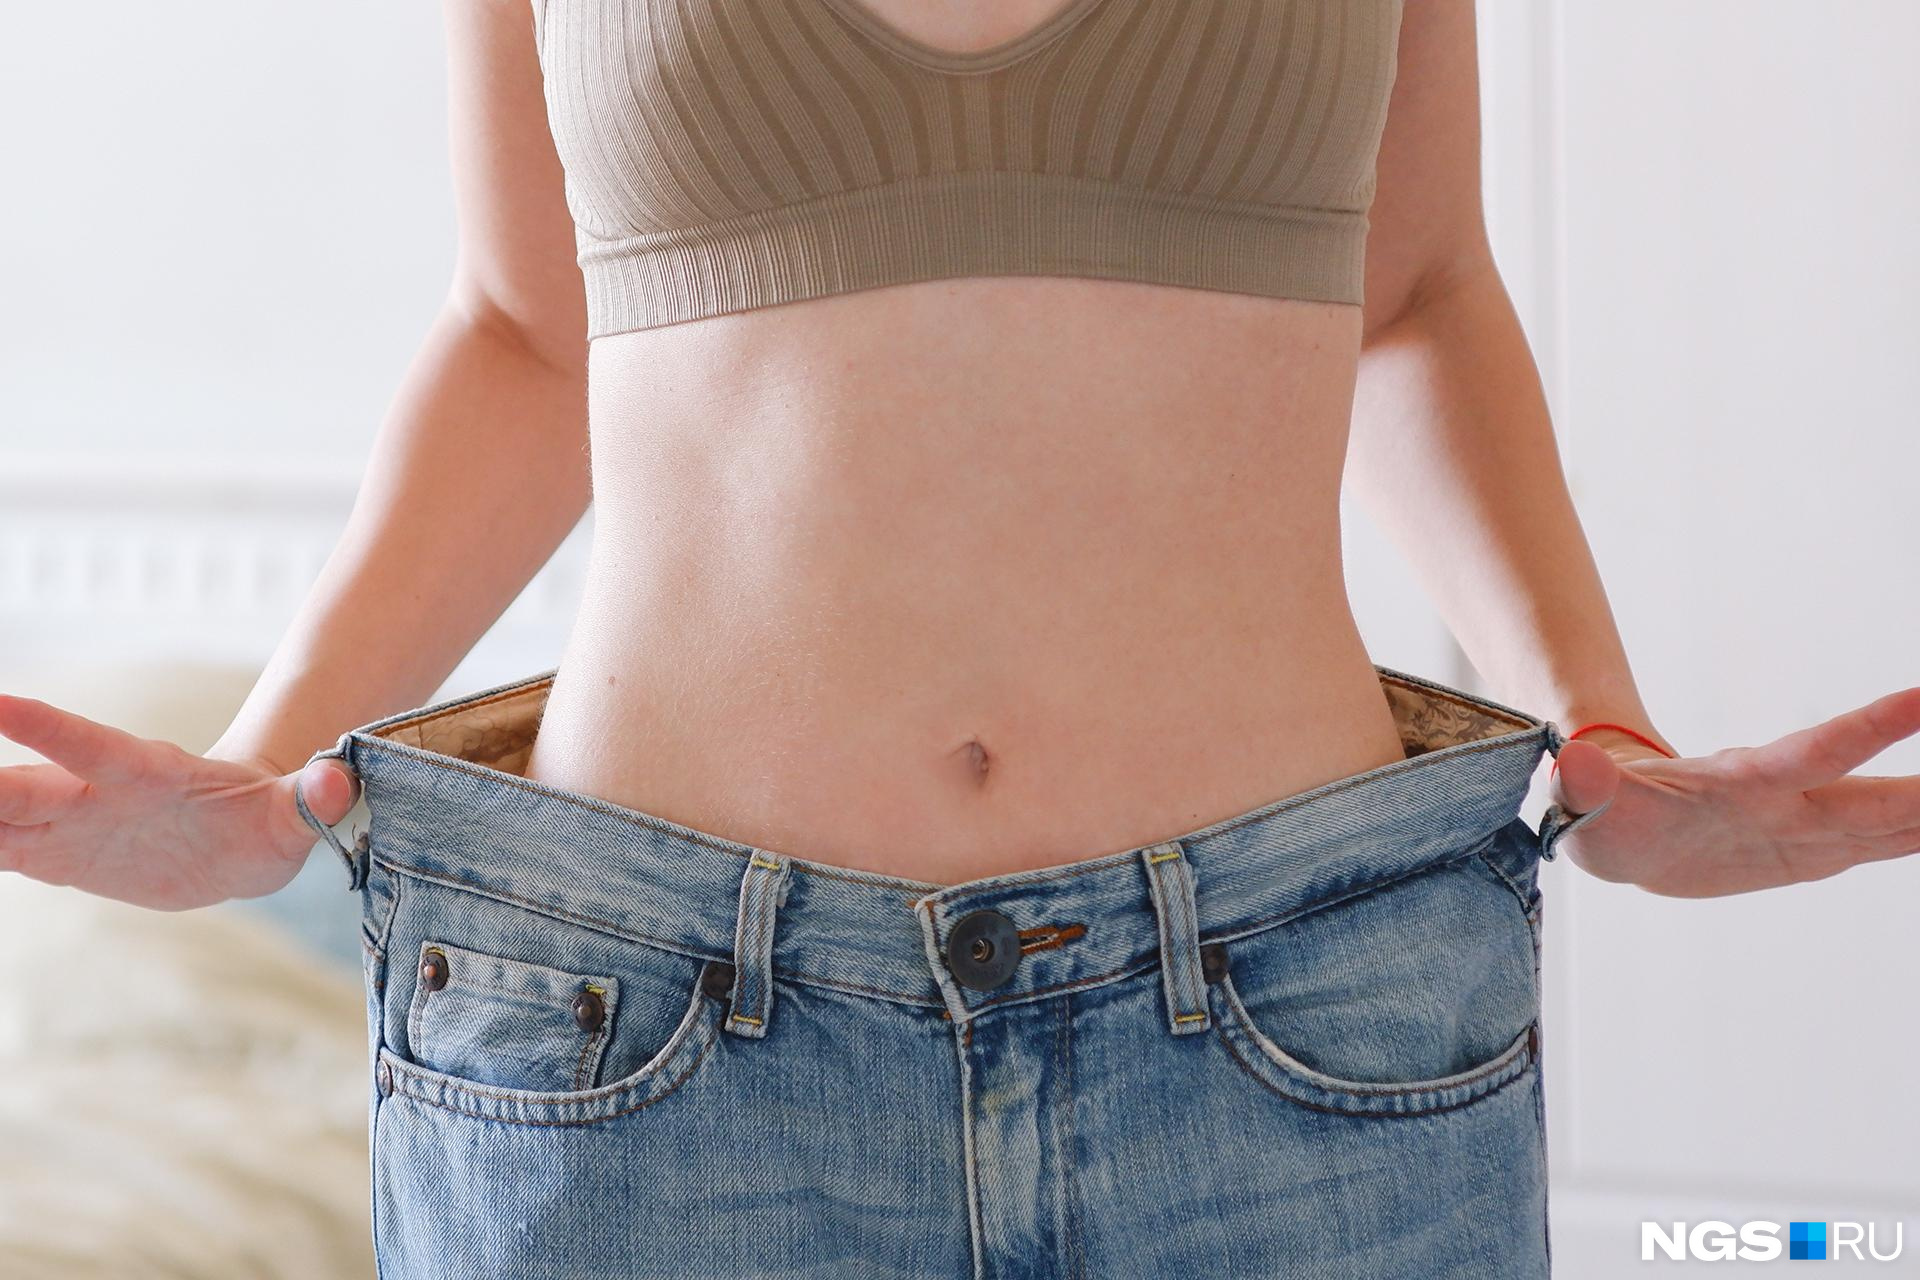 Why Trying to Lose Weight by Summer Leads to Even More Weight Gain